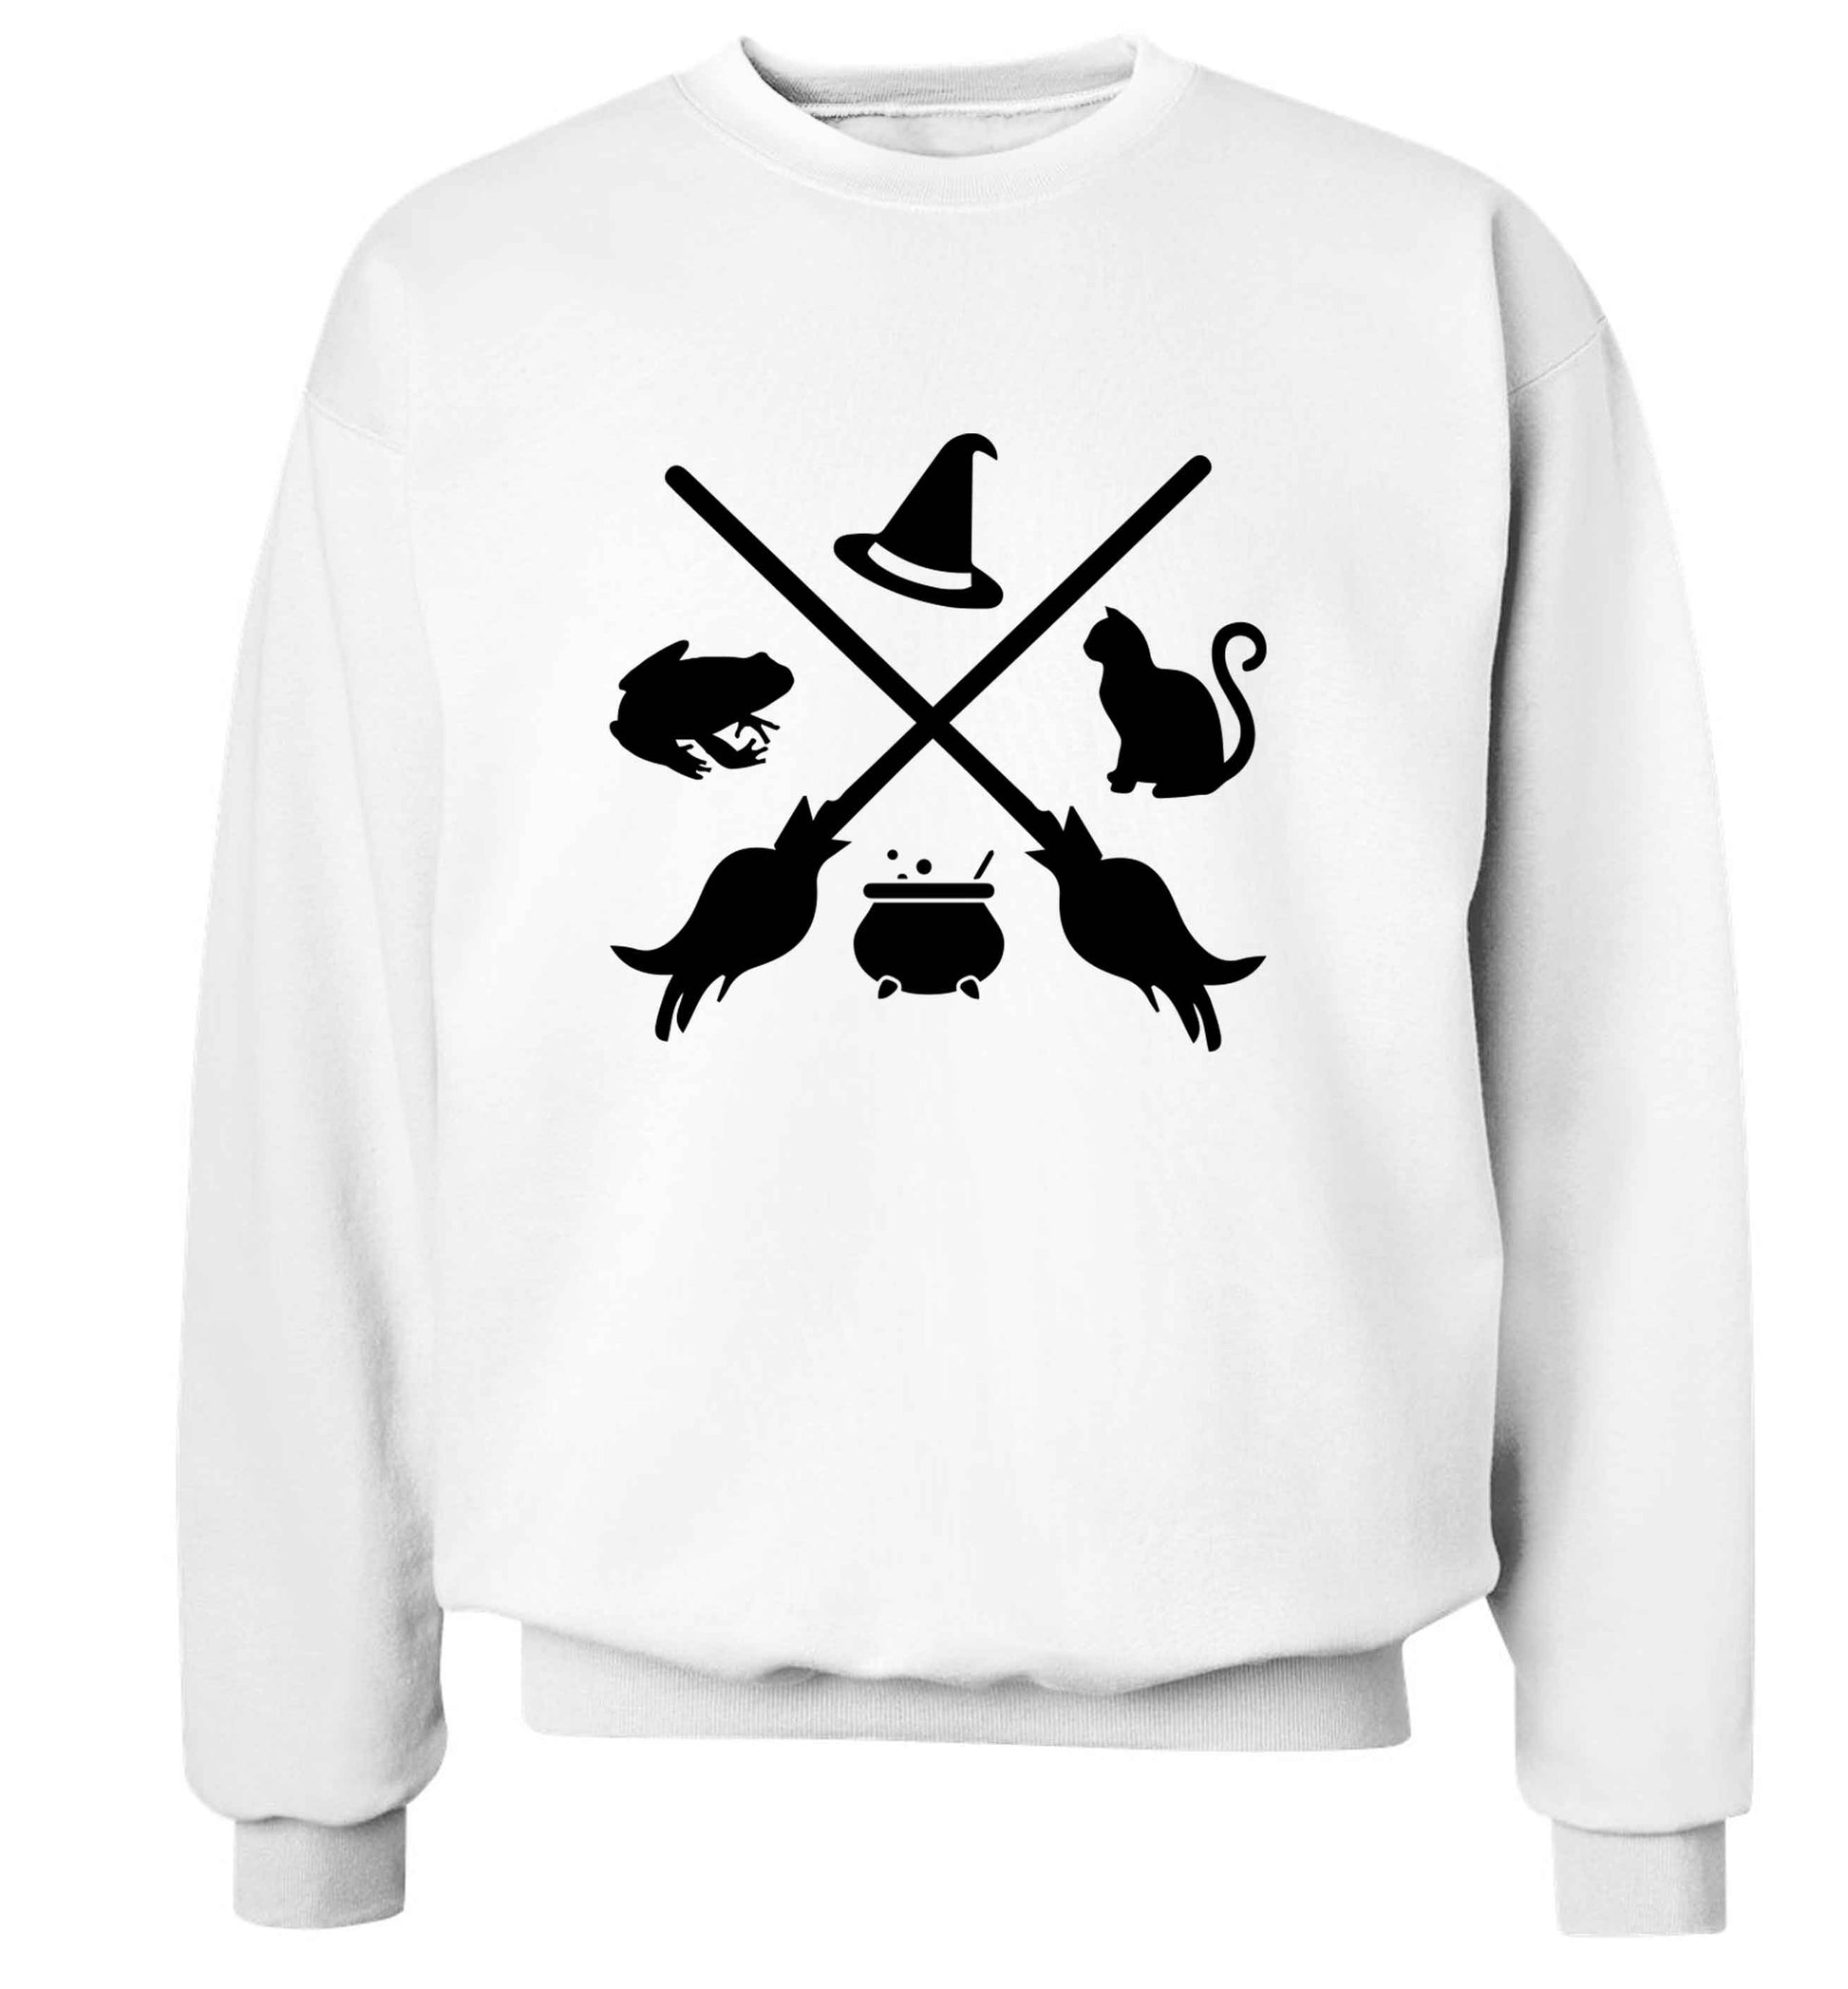 Witch symbol adult's unisex white sweater 2XL